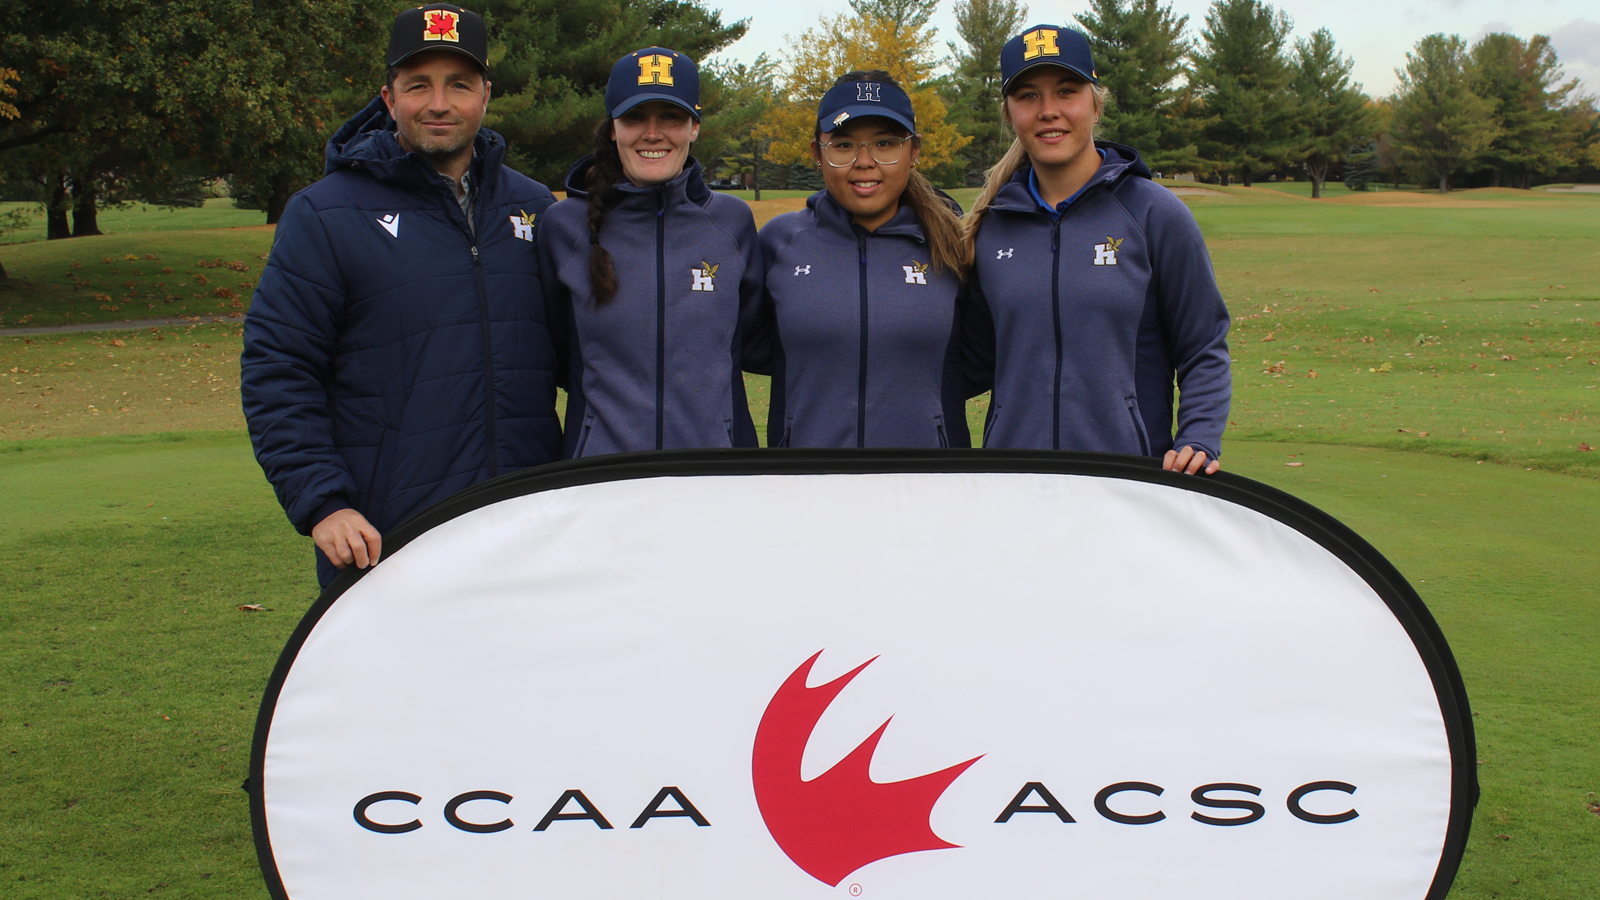 Day One at the CCAA Golf Championships presented by PING